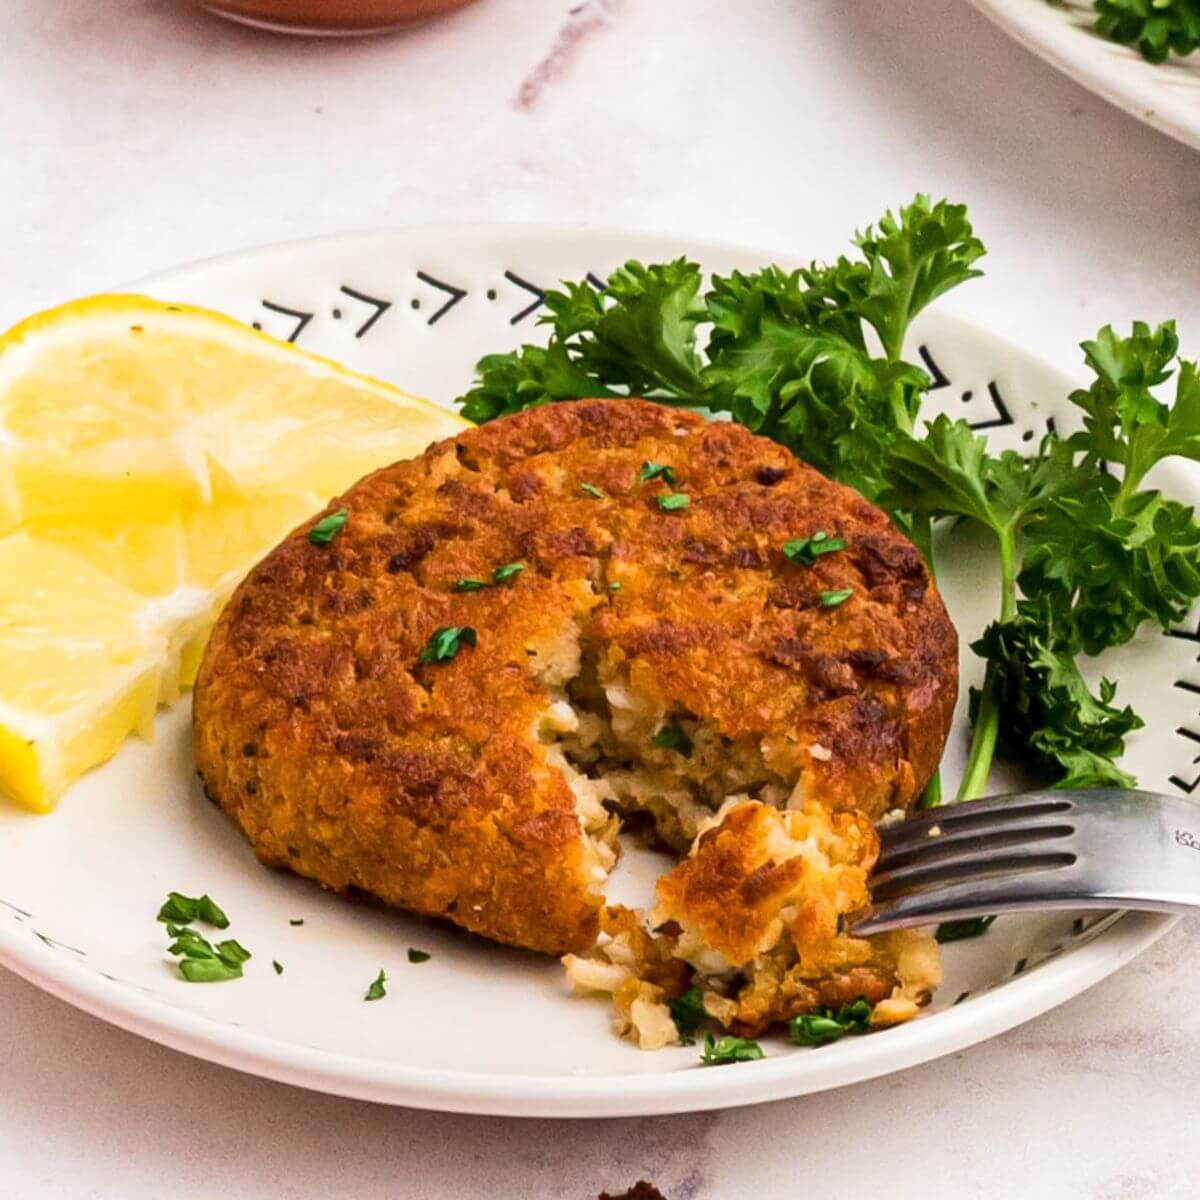 Golden crispy crab cake on a small white plate with a fork removing a bite and with a small bowl of cocktail sauce on the table for dipping.